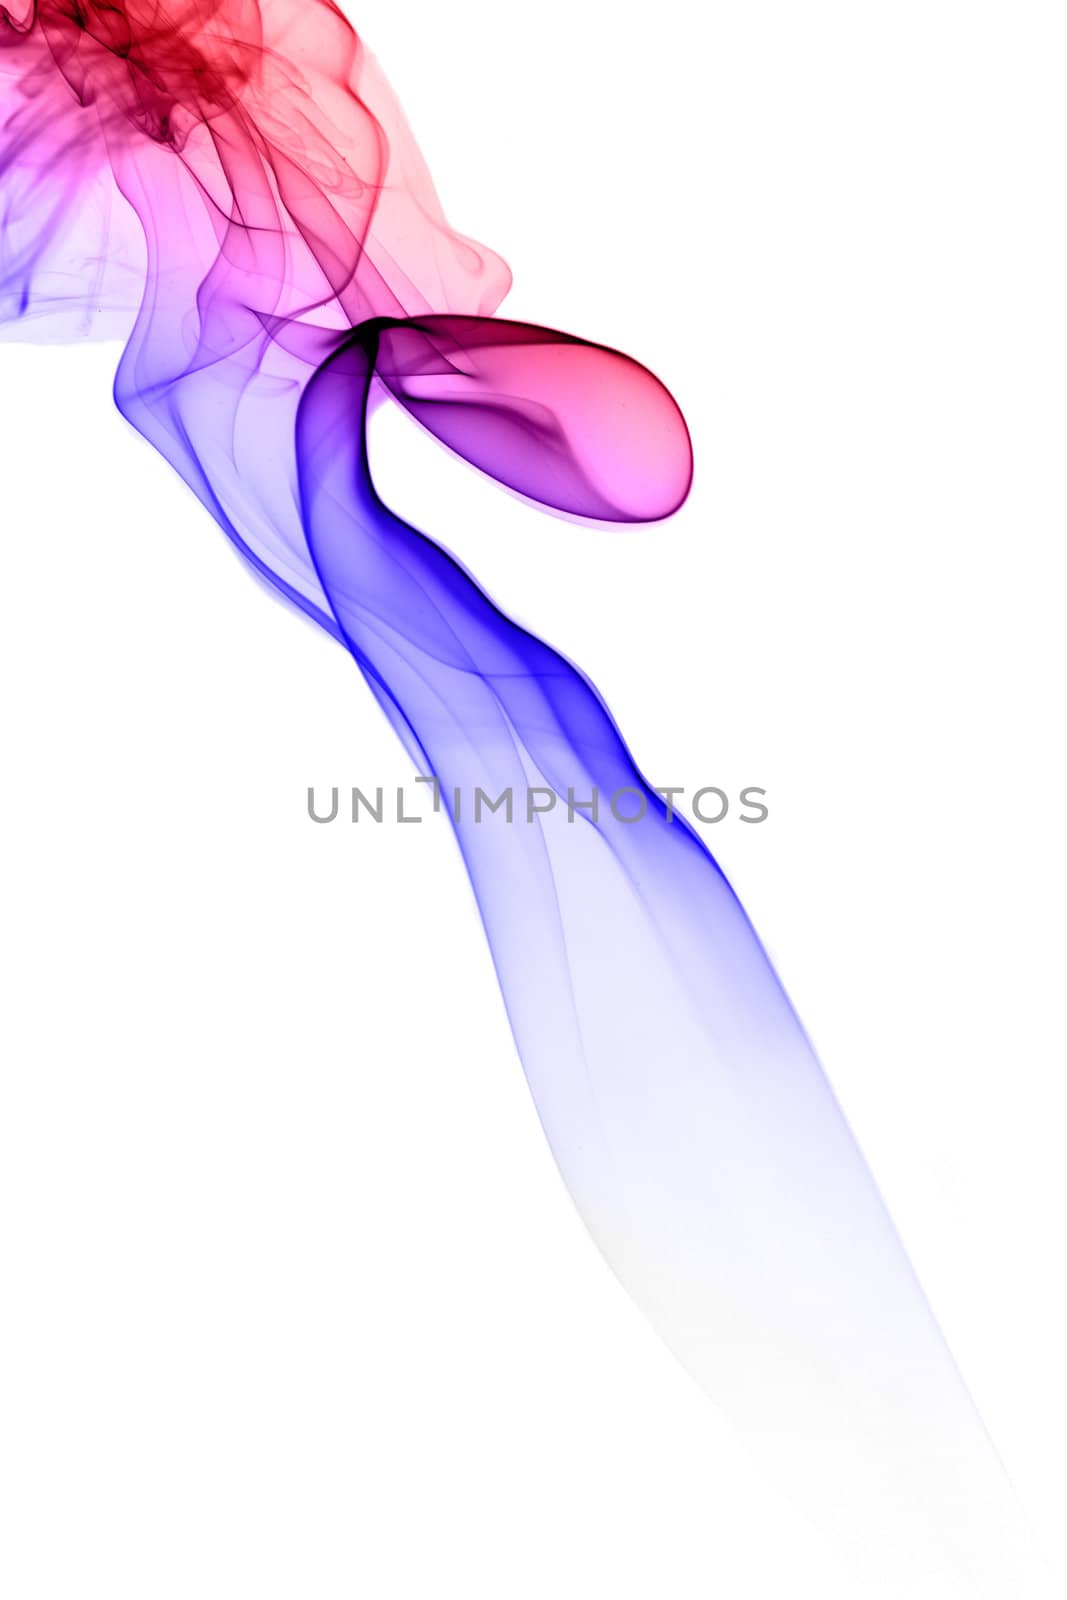 Colored smoke isolated by dimol